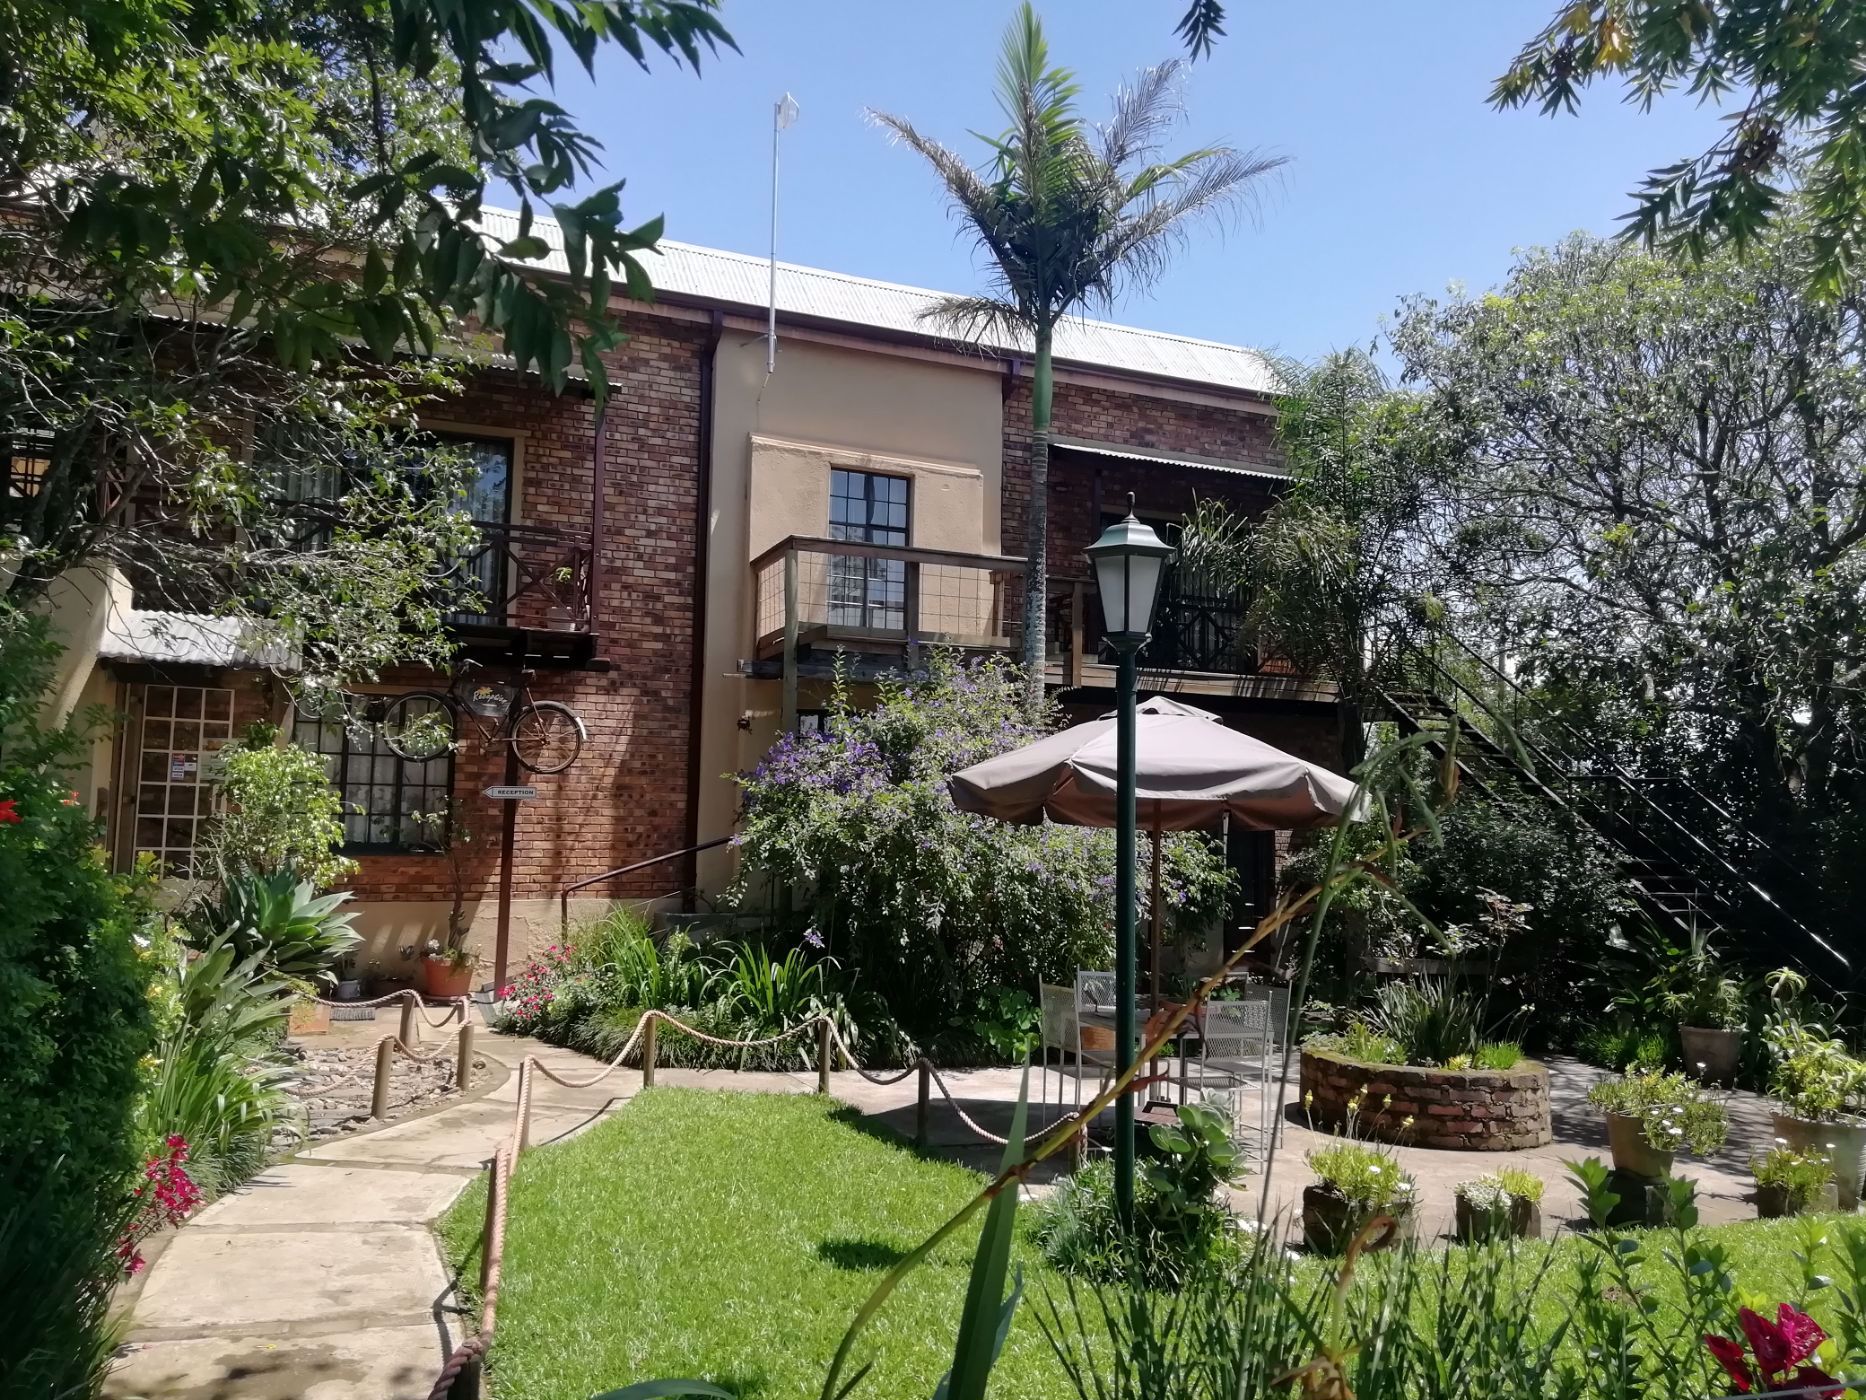 19 guest room guesthouse for sale in Graskop